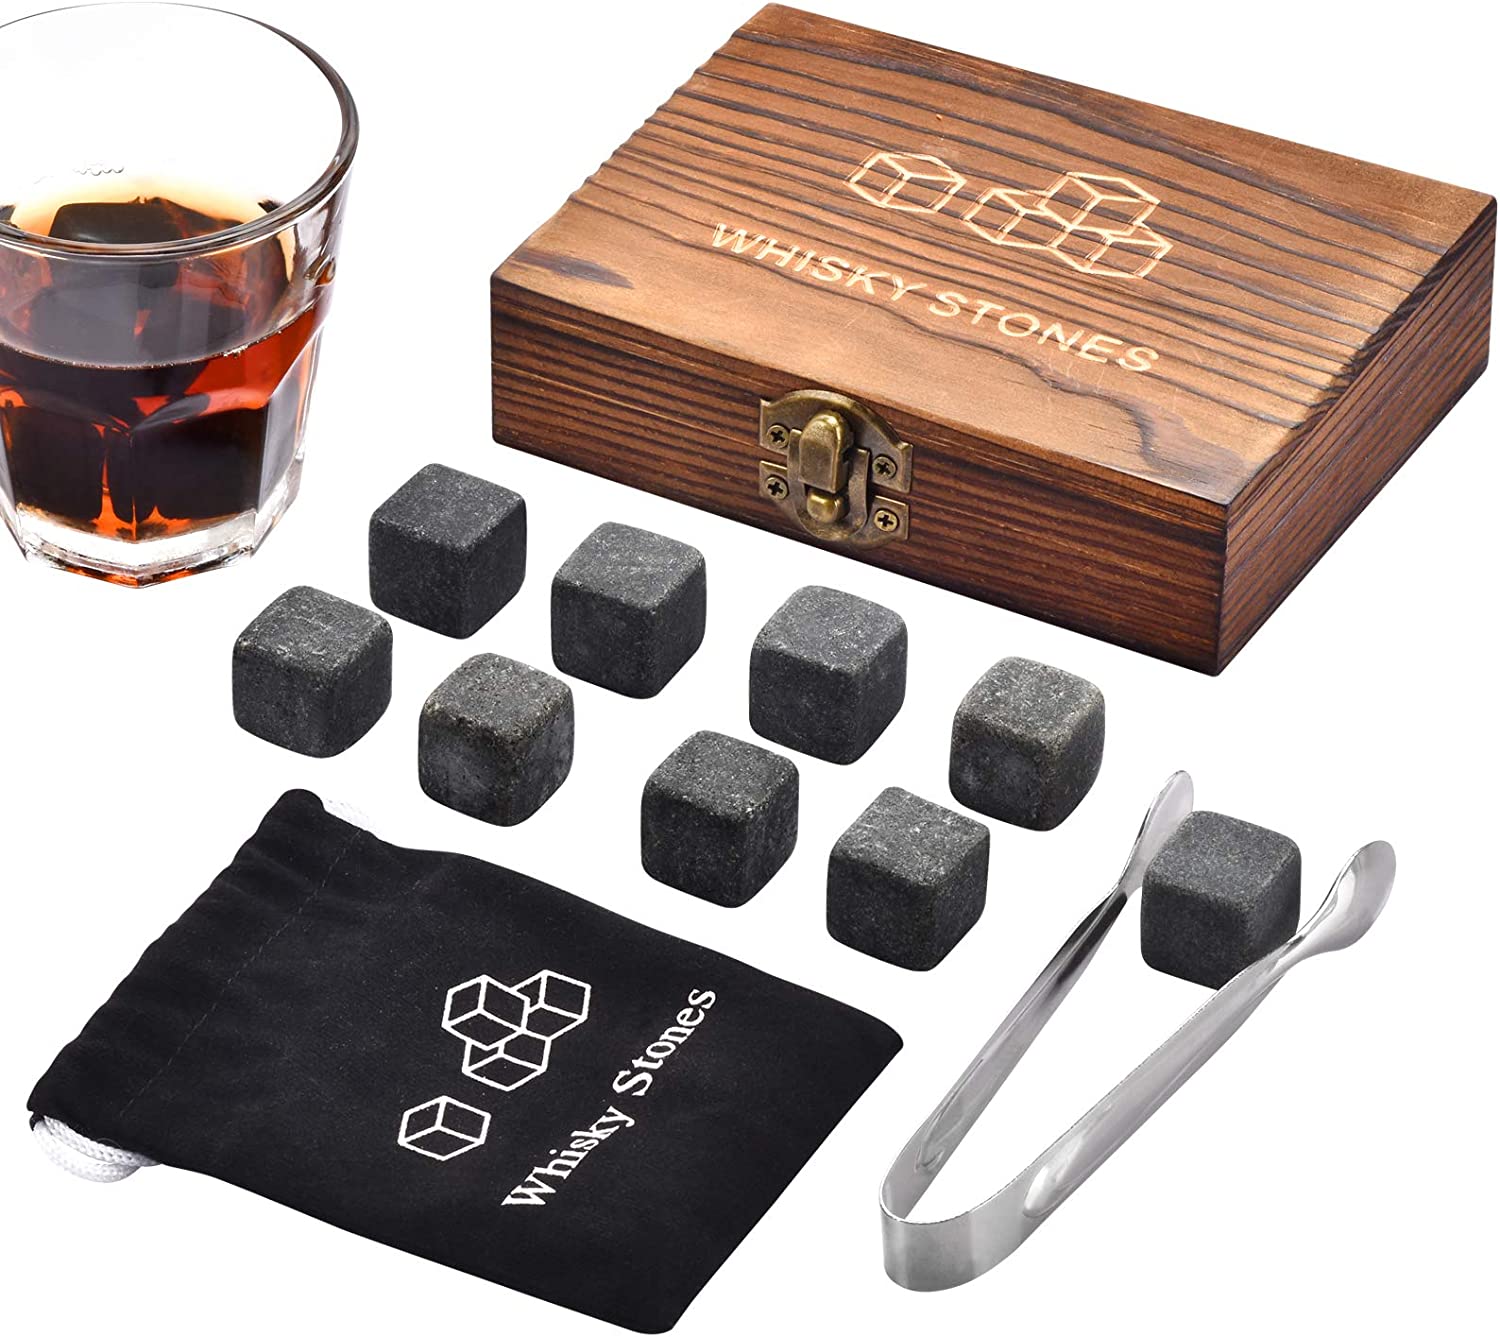 wine glasses whiskey stone gift set in wooden box